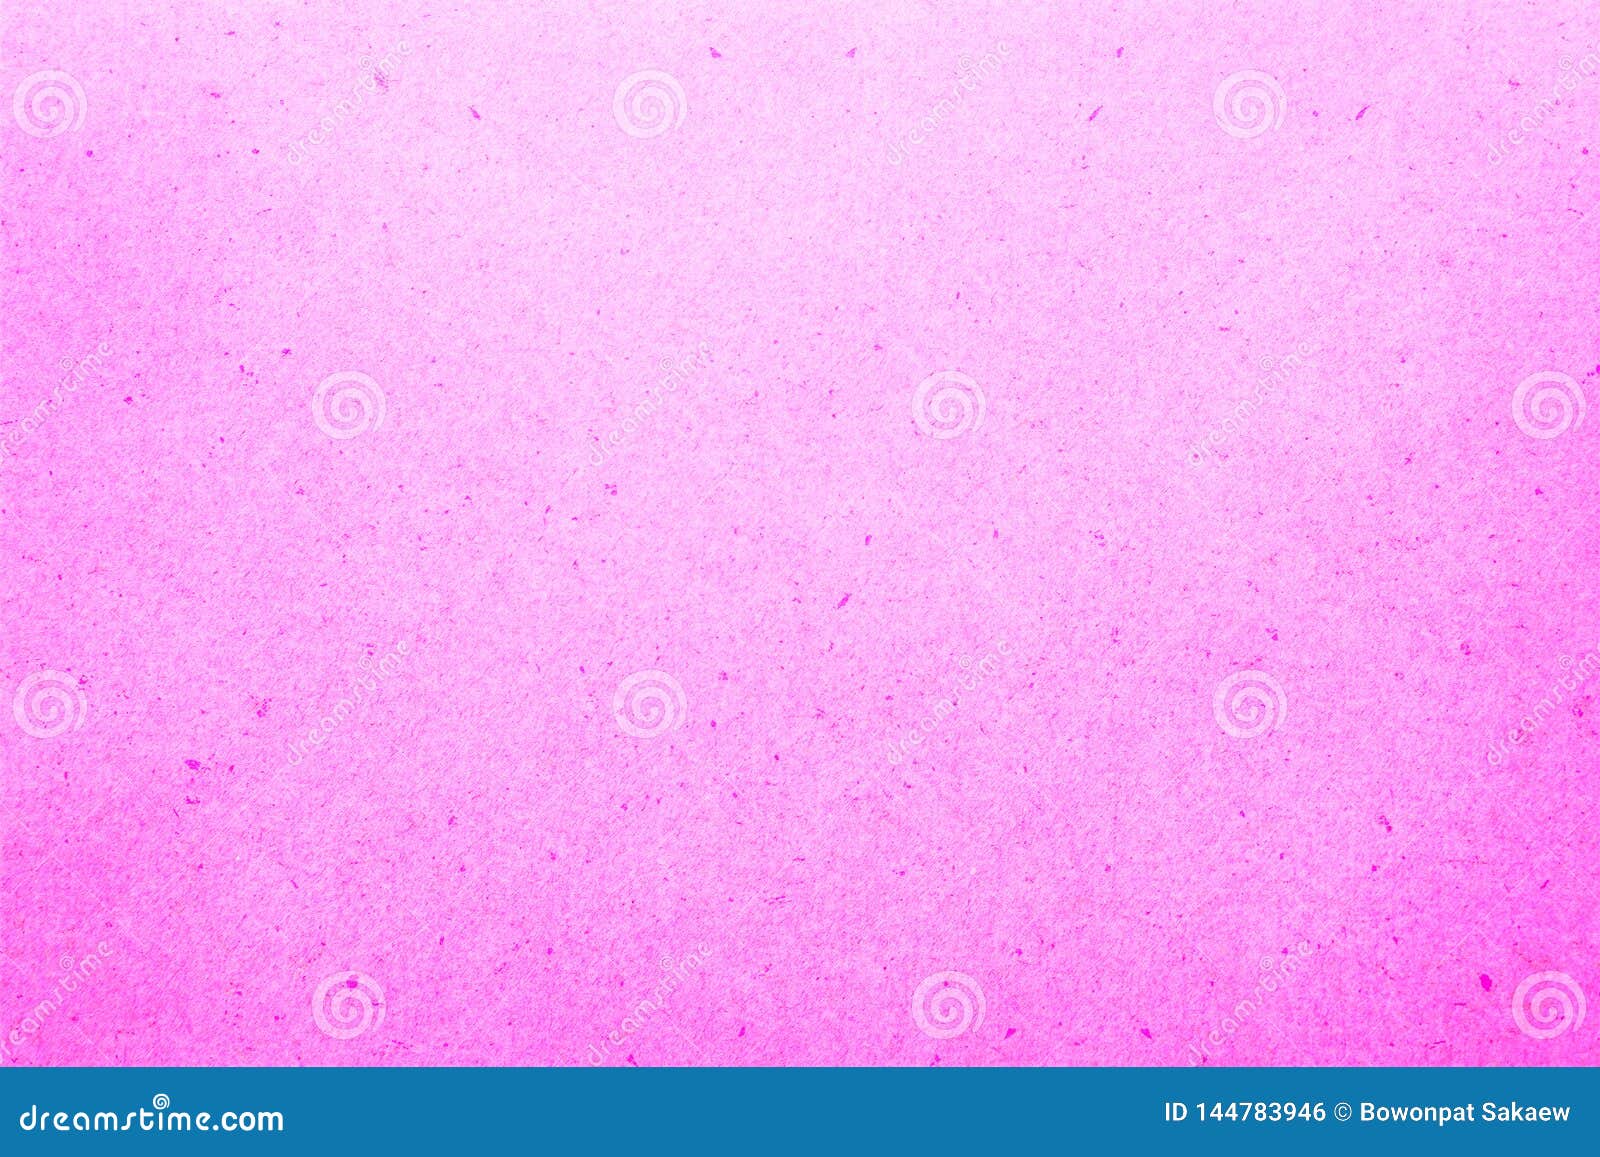 Pink Paper Texture Background Stock Photo - Image of card, beige: 144783946